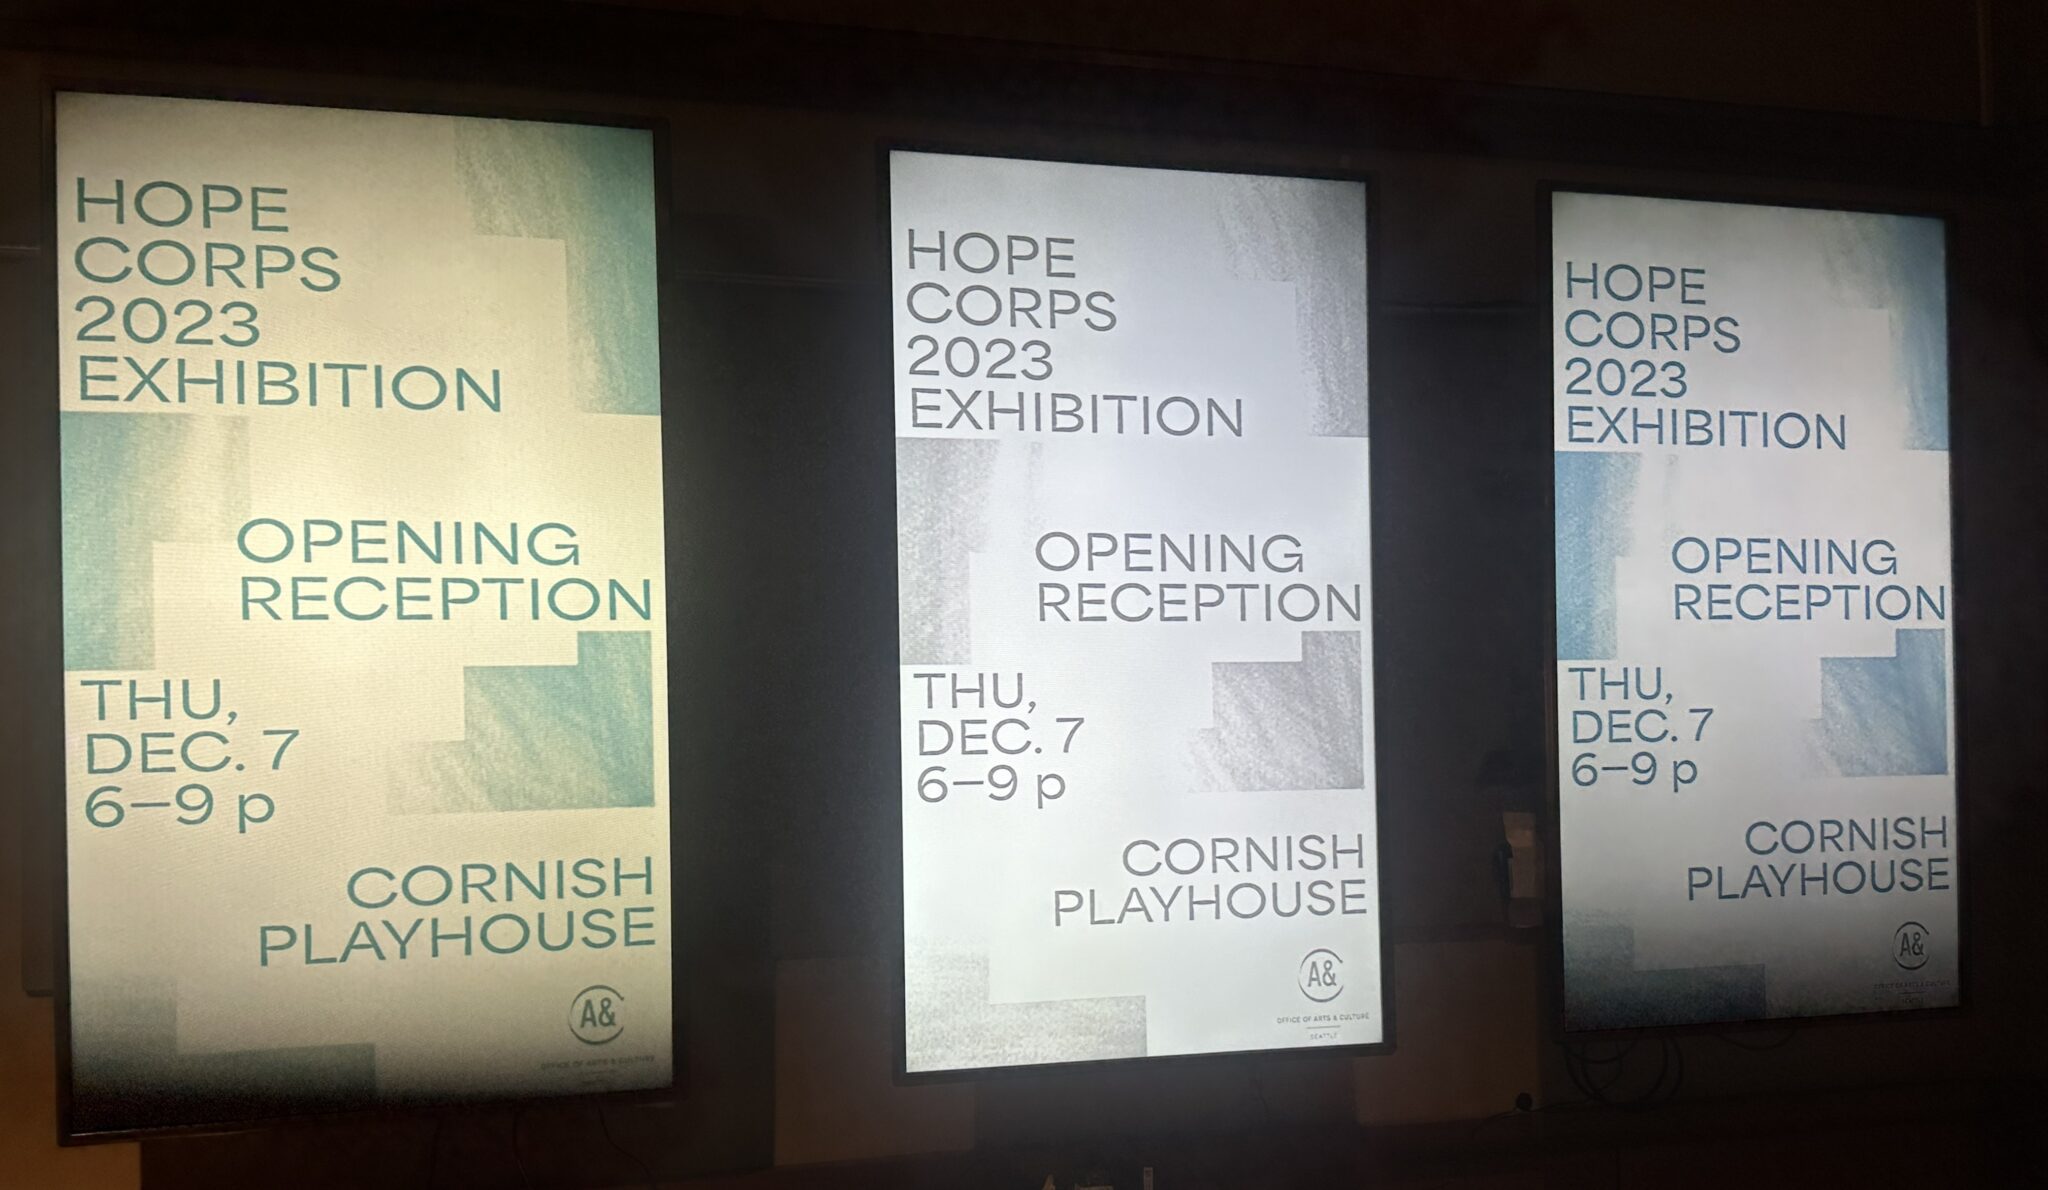 3 posters side by side for the Hope Corps 2023 Exhibition December 7 opening reception at Cornish Playhouse.